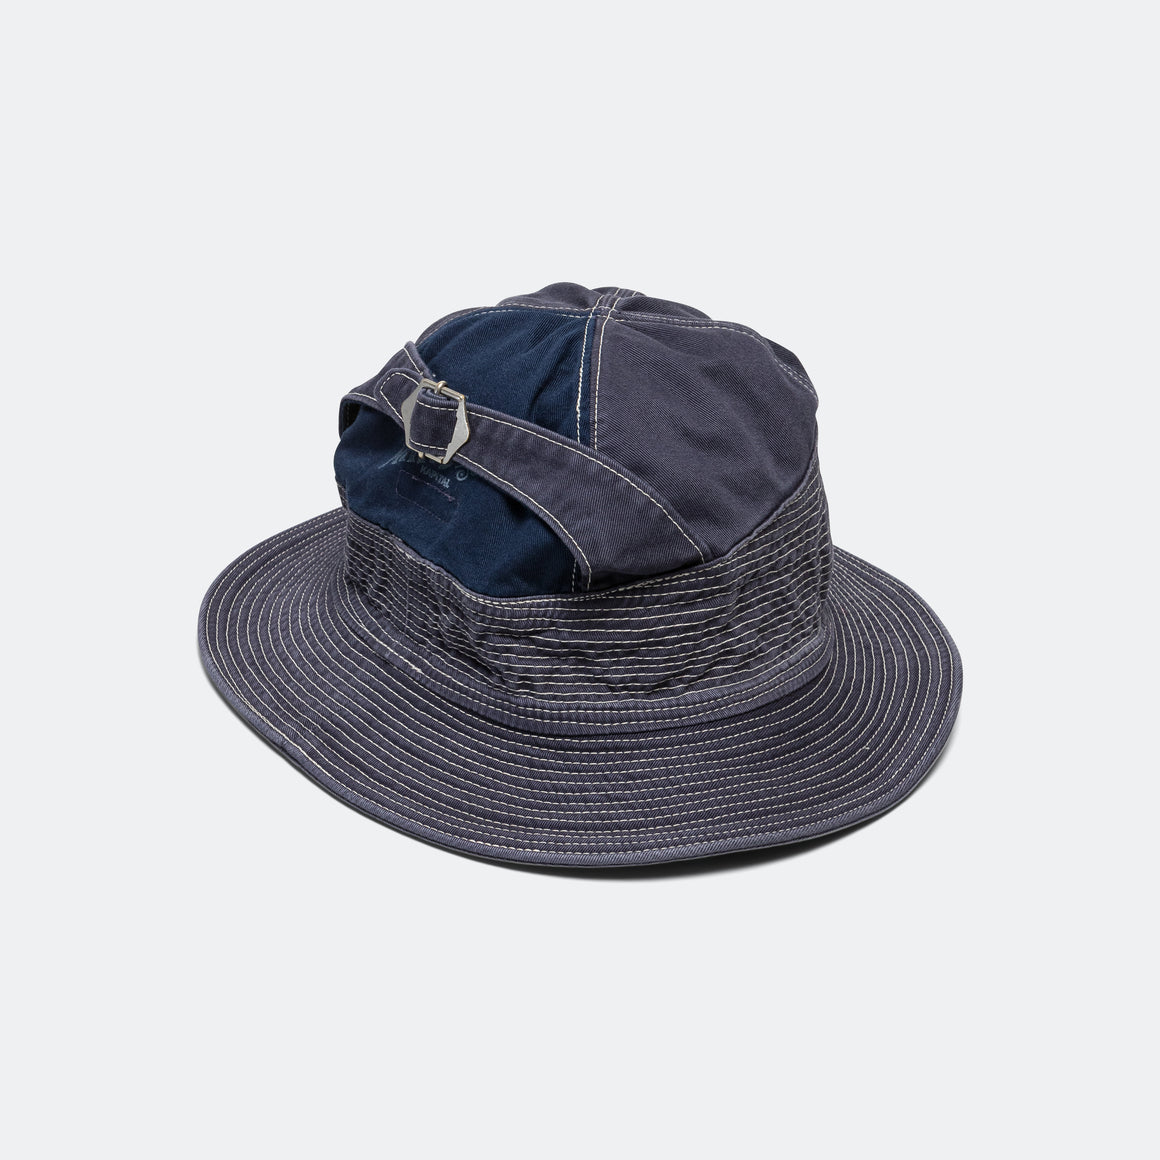 Kapital - Chino THE OLD MAN AND THE SEA Hat - Navy - UP THERE